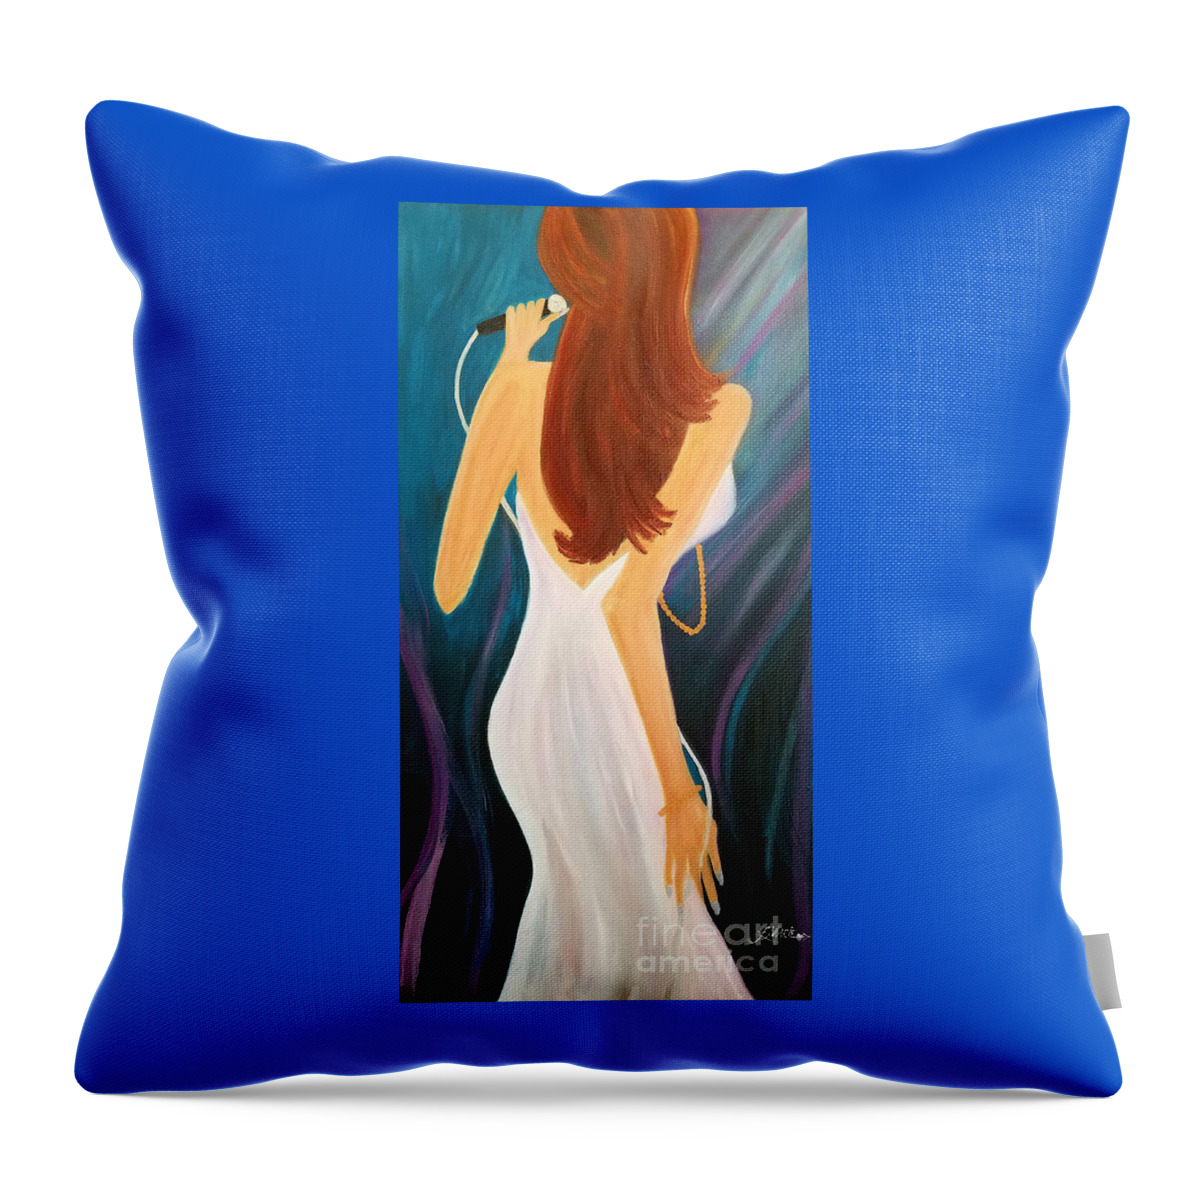 Sing Throw Pillow featuring the painting Everybody's Got A Song To Sing by Artist Linda Marie